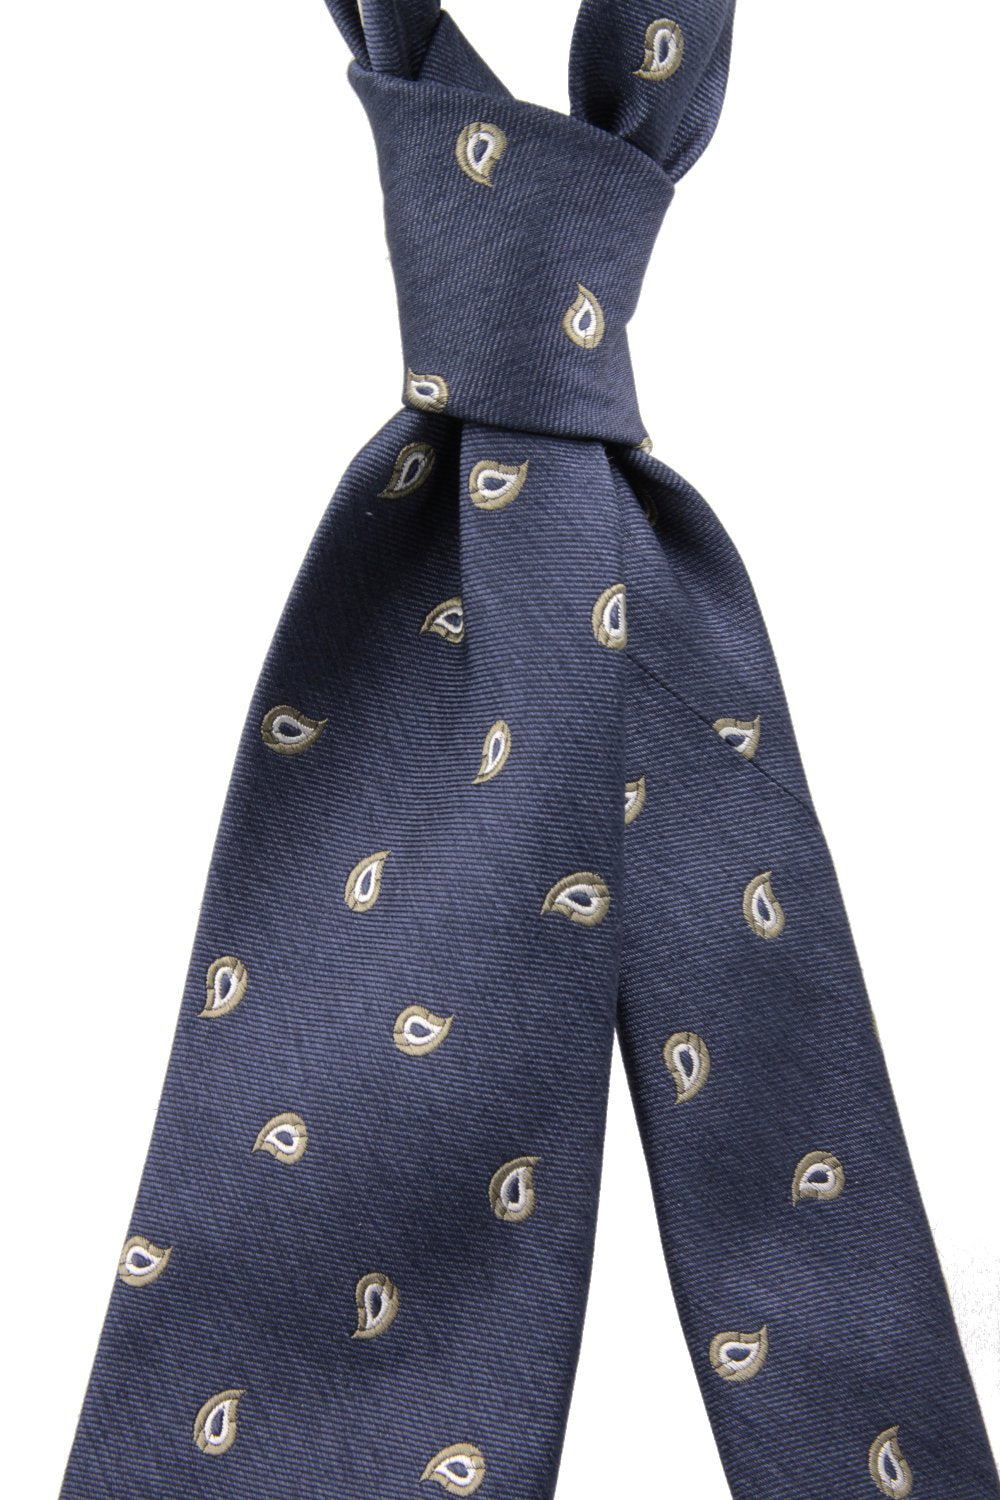 Royal blue, white and olive green paisley tie